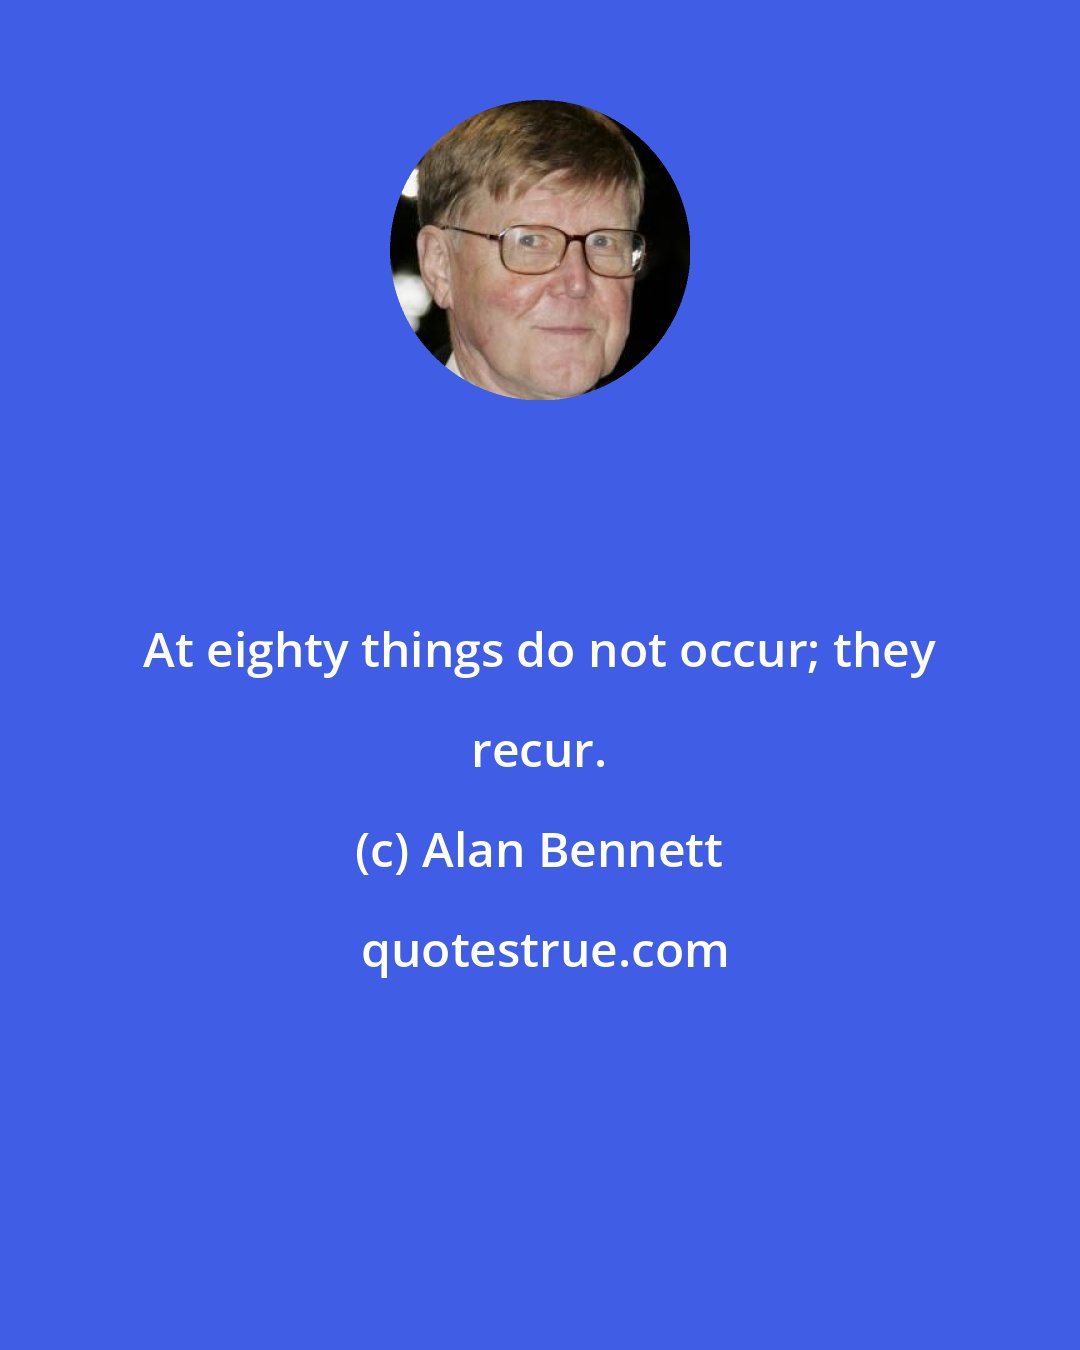 Alan Bennett: At eighty things do not occur; they recur.